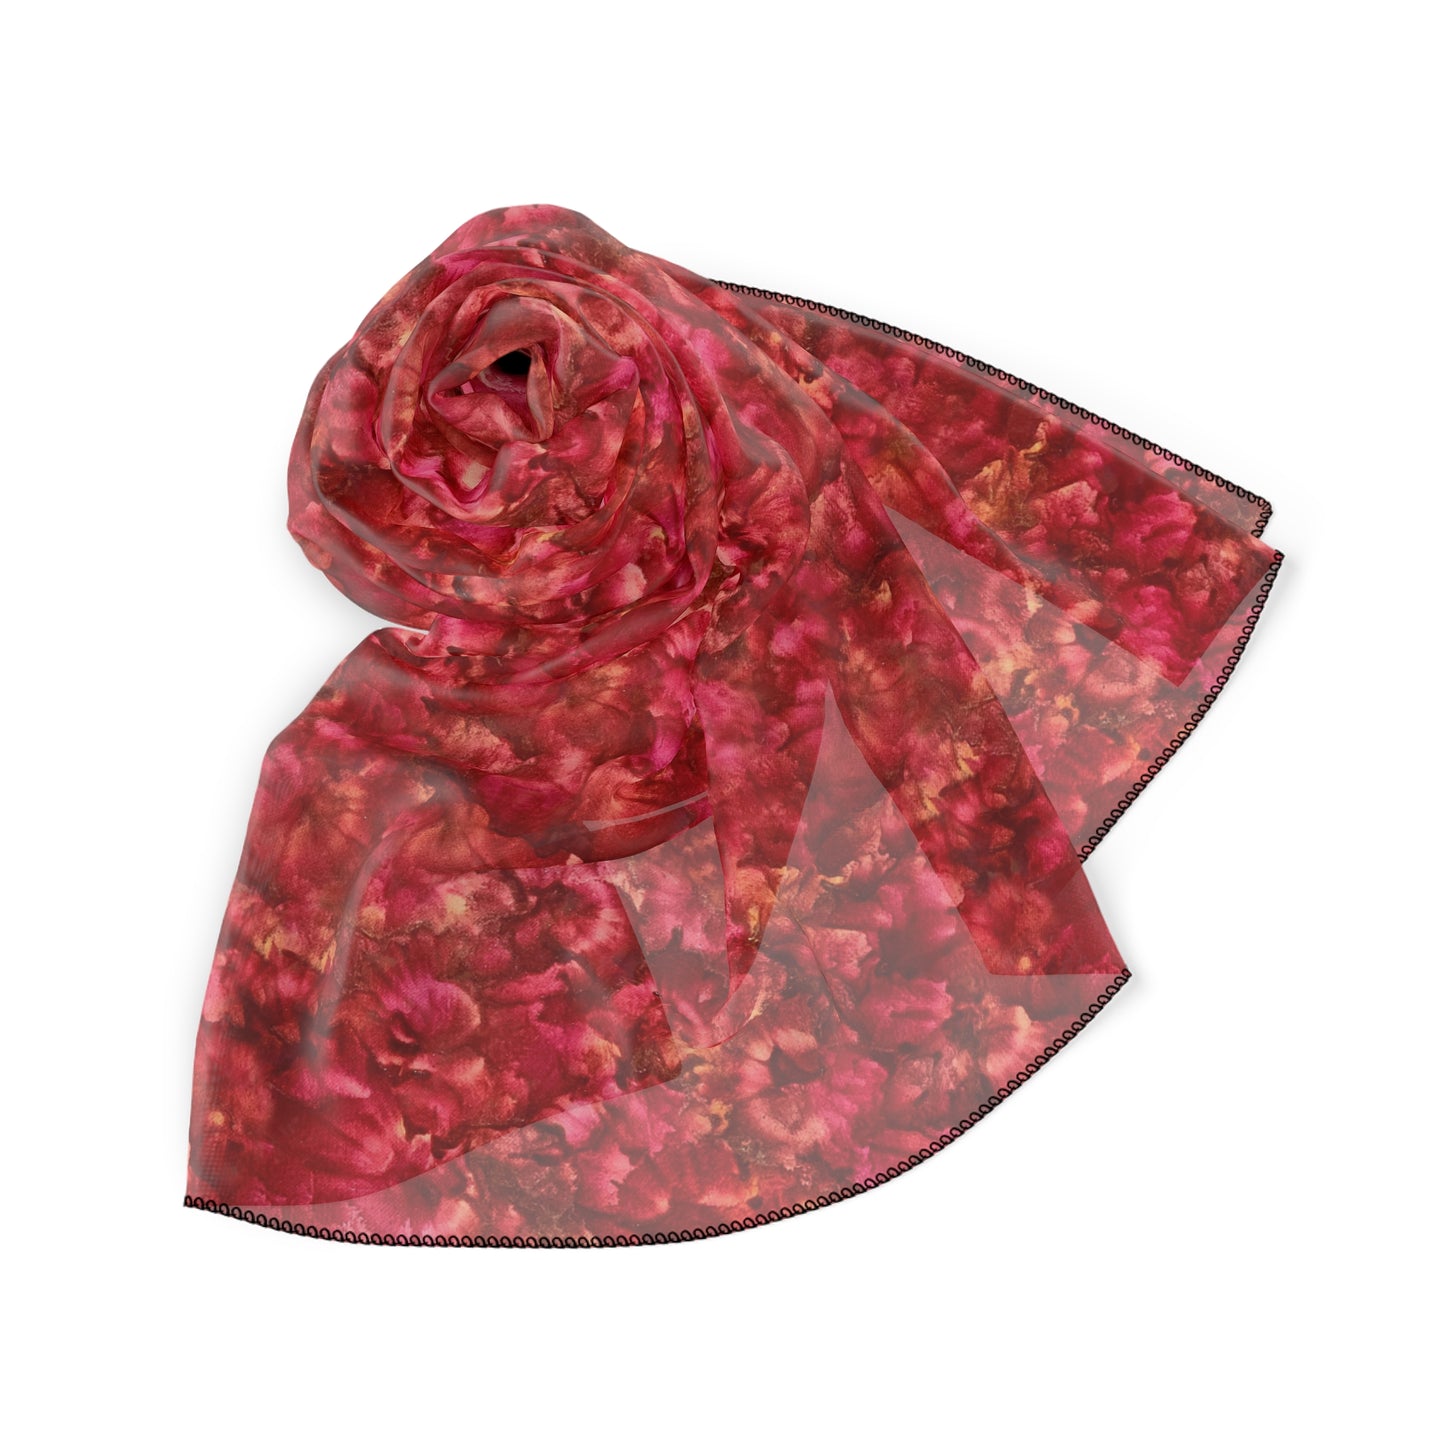 Amore Red Scarf